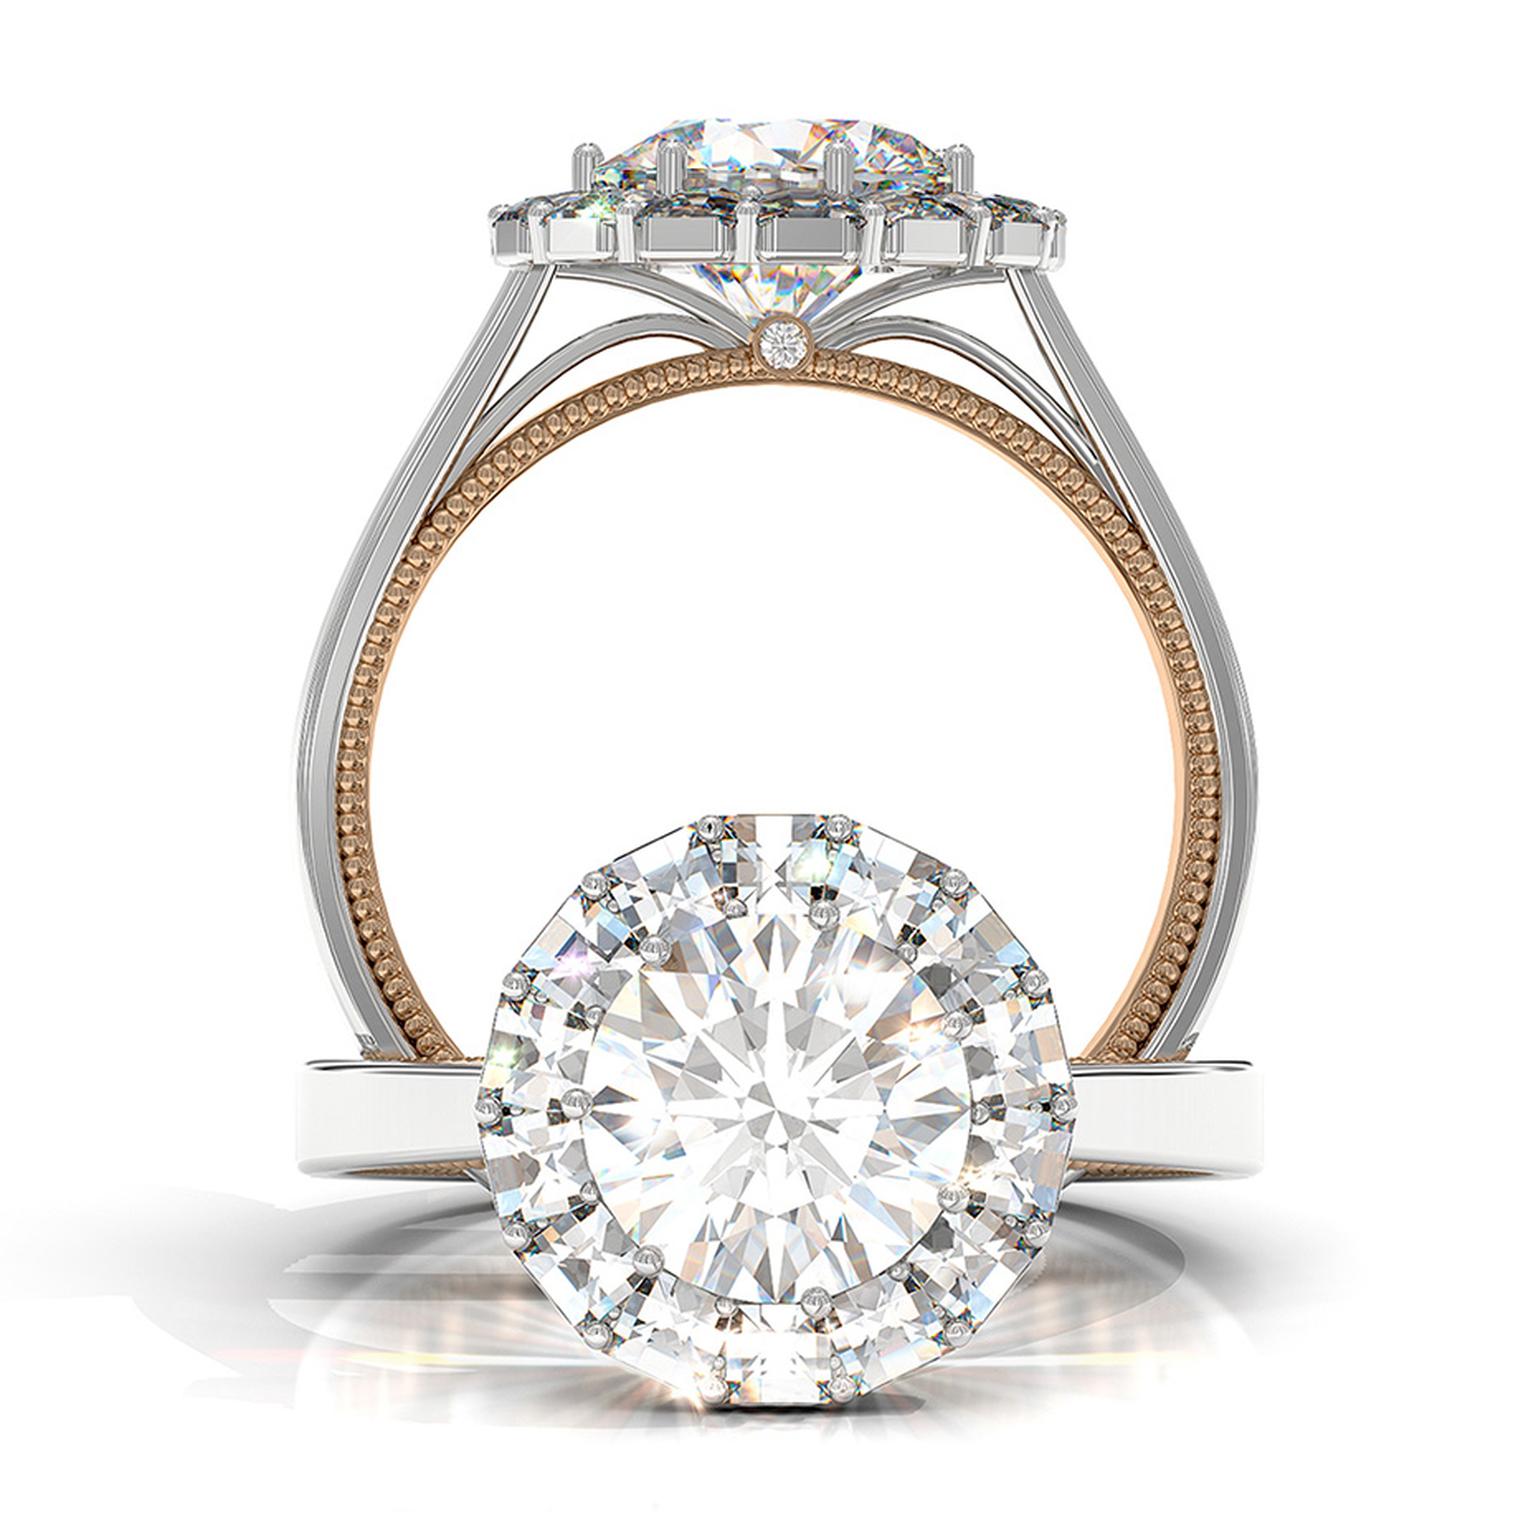 Bez Ambar Ring of Fire engagement ring in white and rose gold, set with a 1.50ct round brilliant diamond encircled by a halo of Blaze diamonds